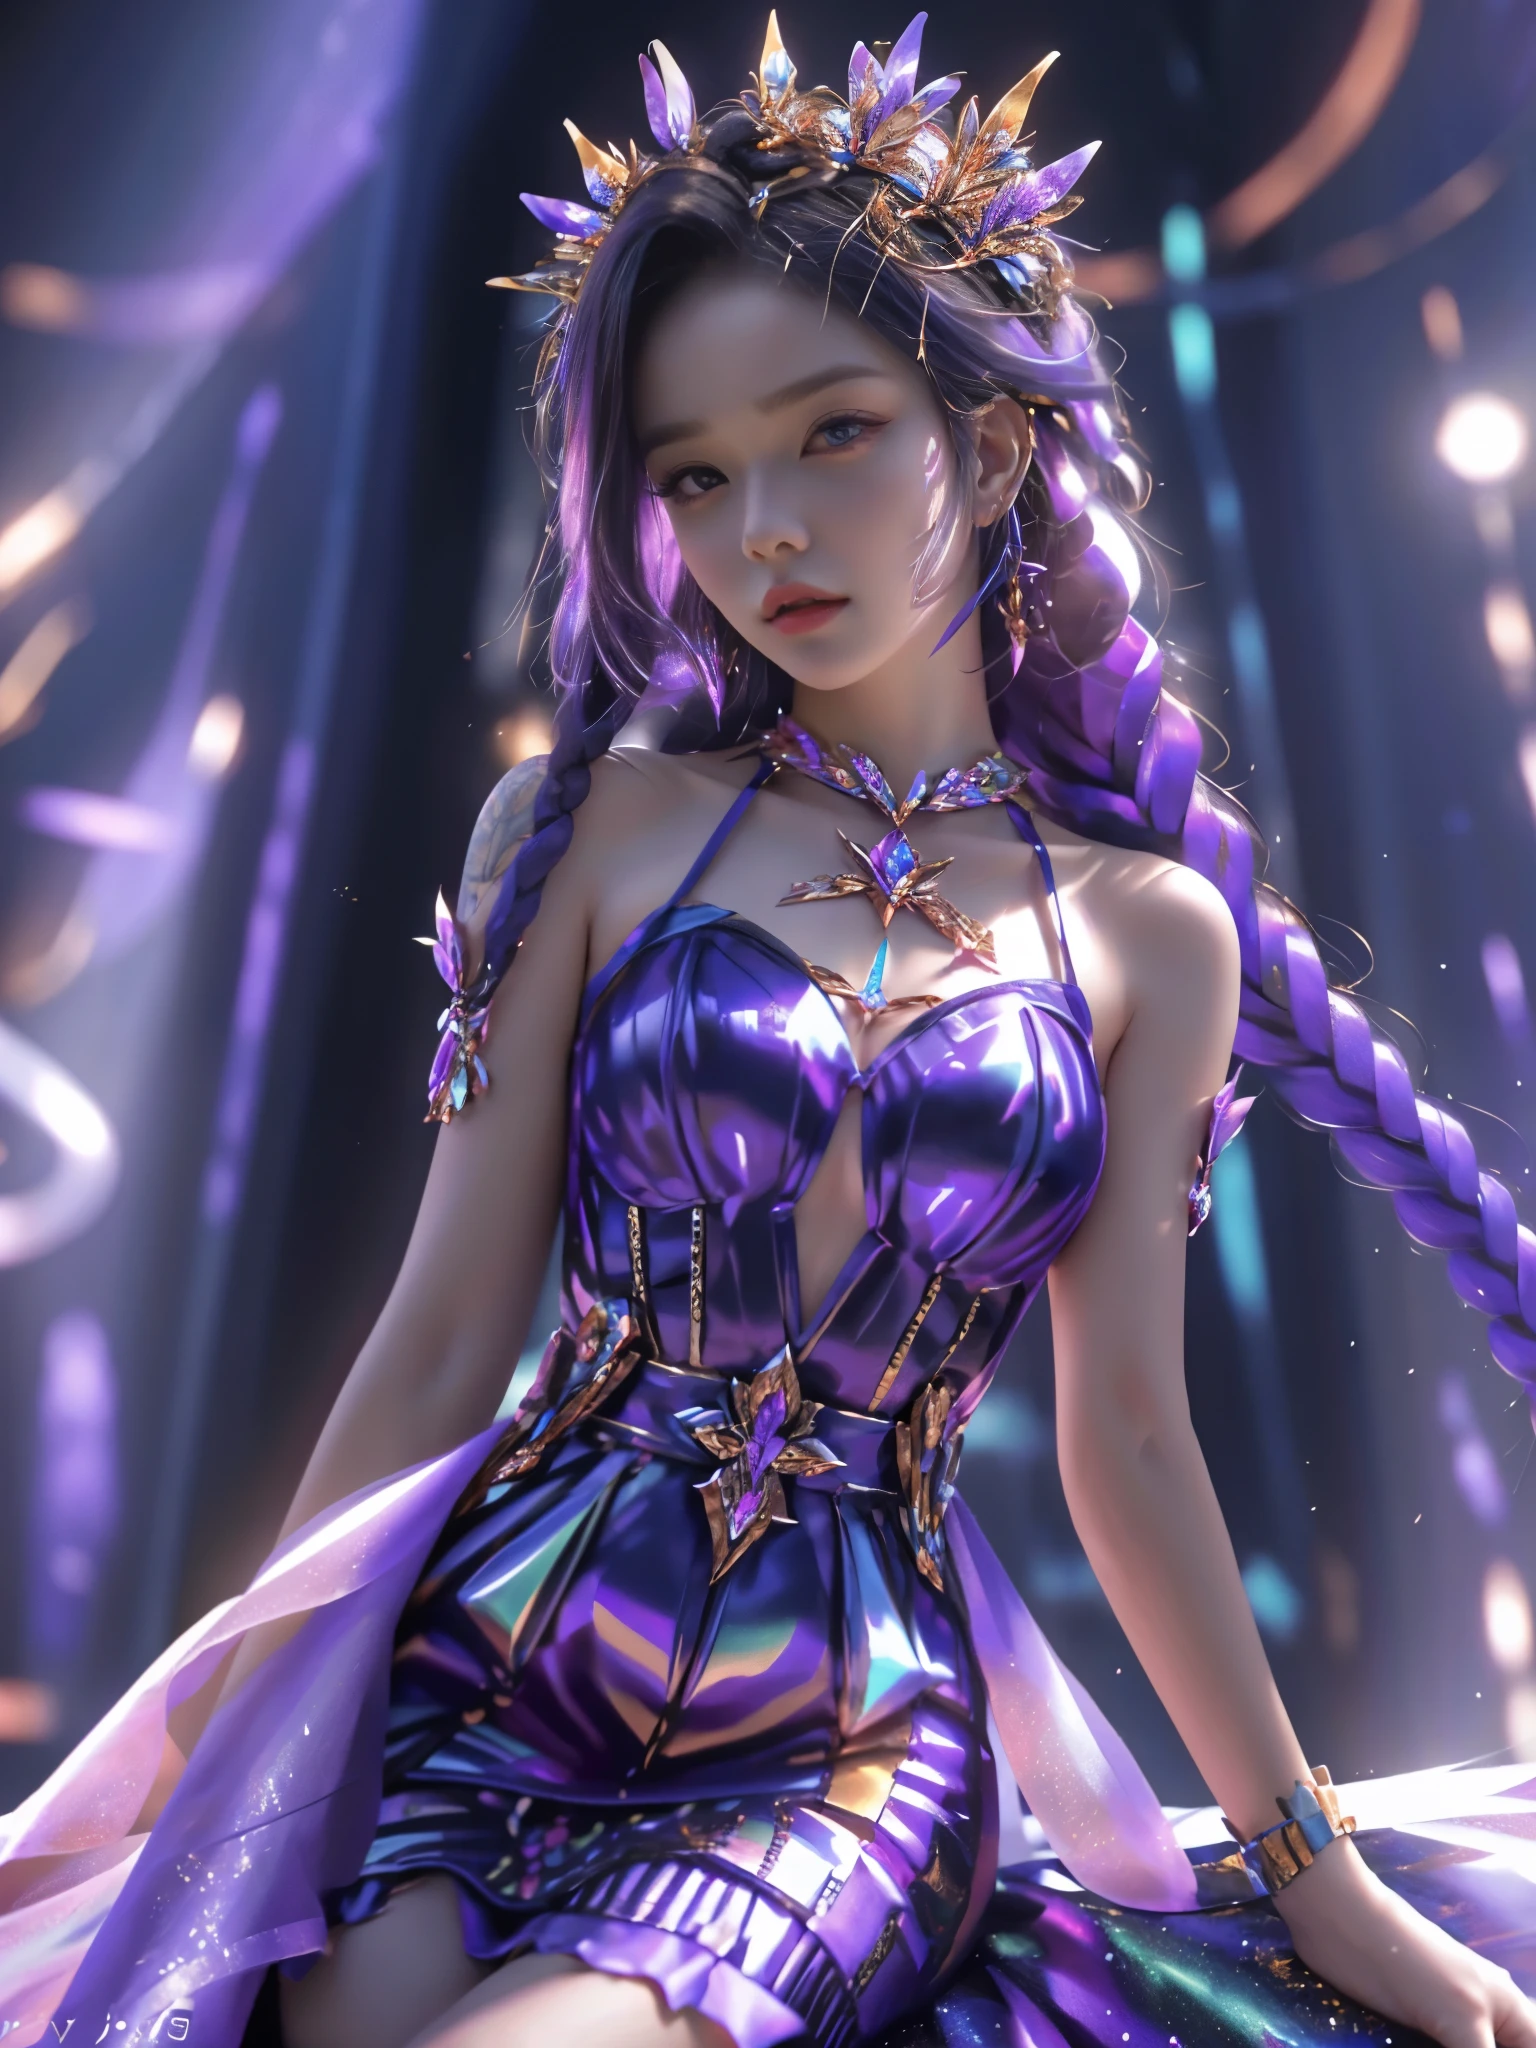 best quality， 1 girl， WHO， alone，Colorful braided dress， looking at the audience， upper part of the body，purple light hits the girl